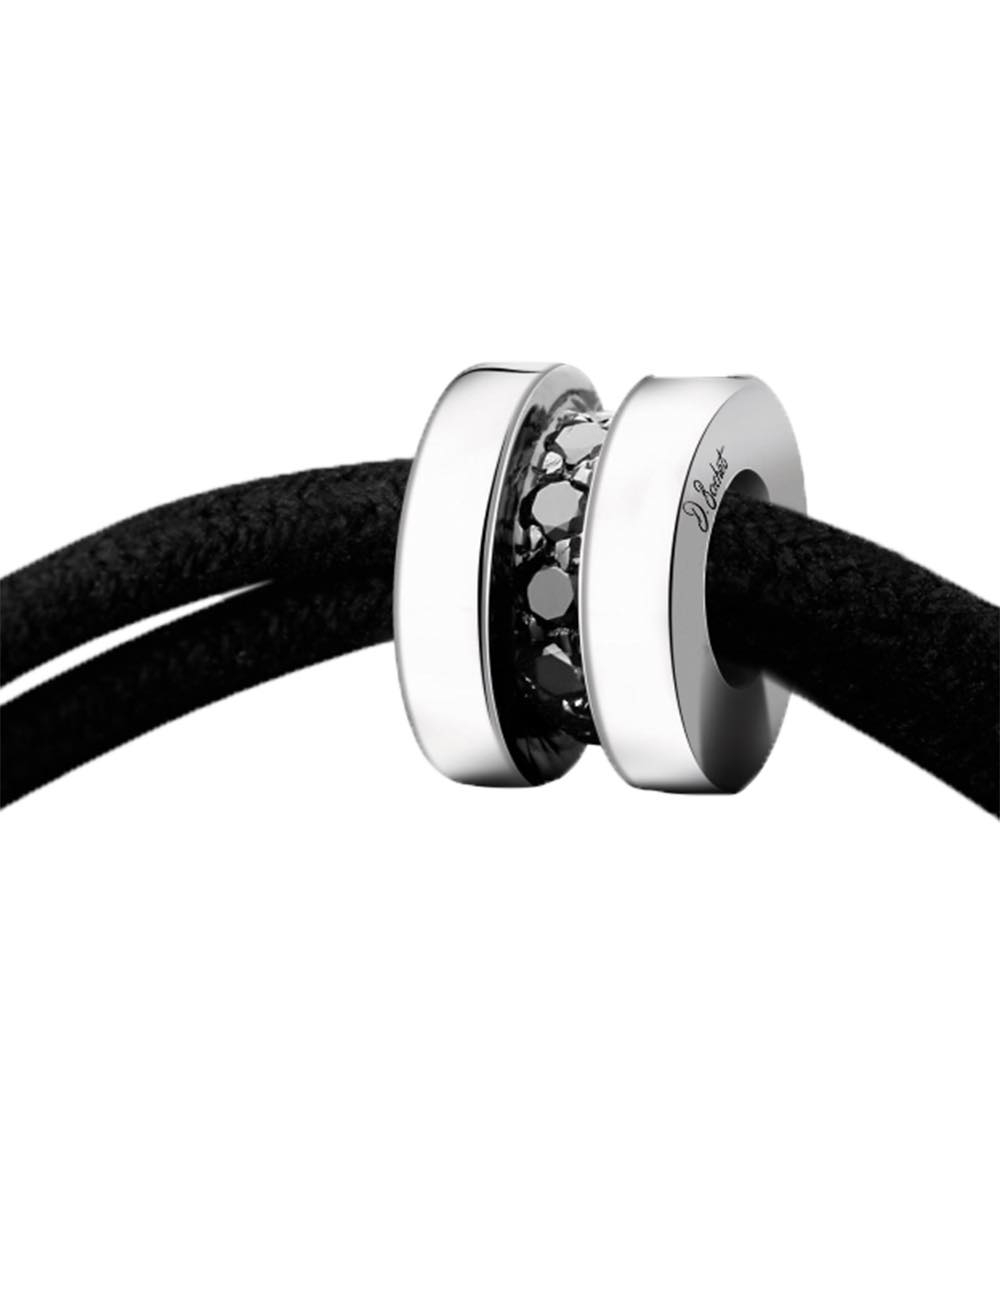 Jewelry gift : men's bracelet on an adjustable black cord, in white gold 18k and black diamonds